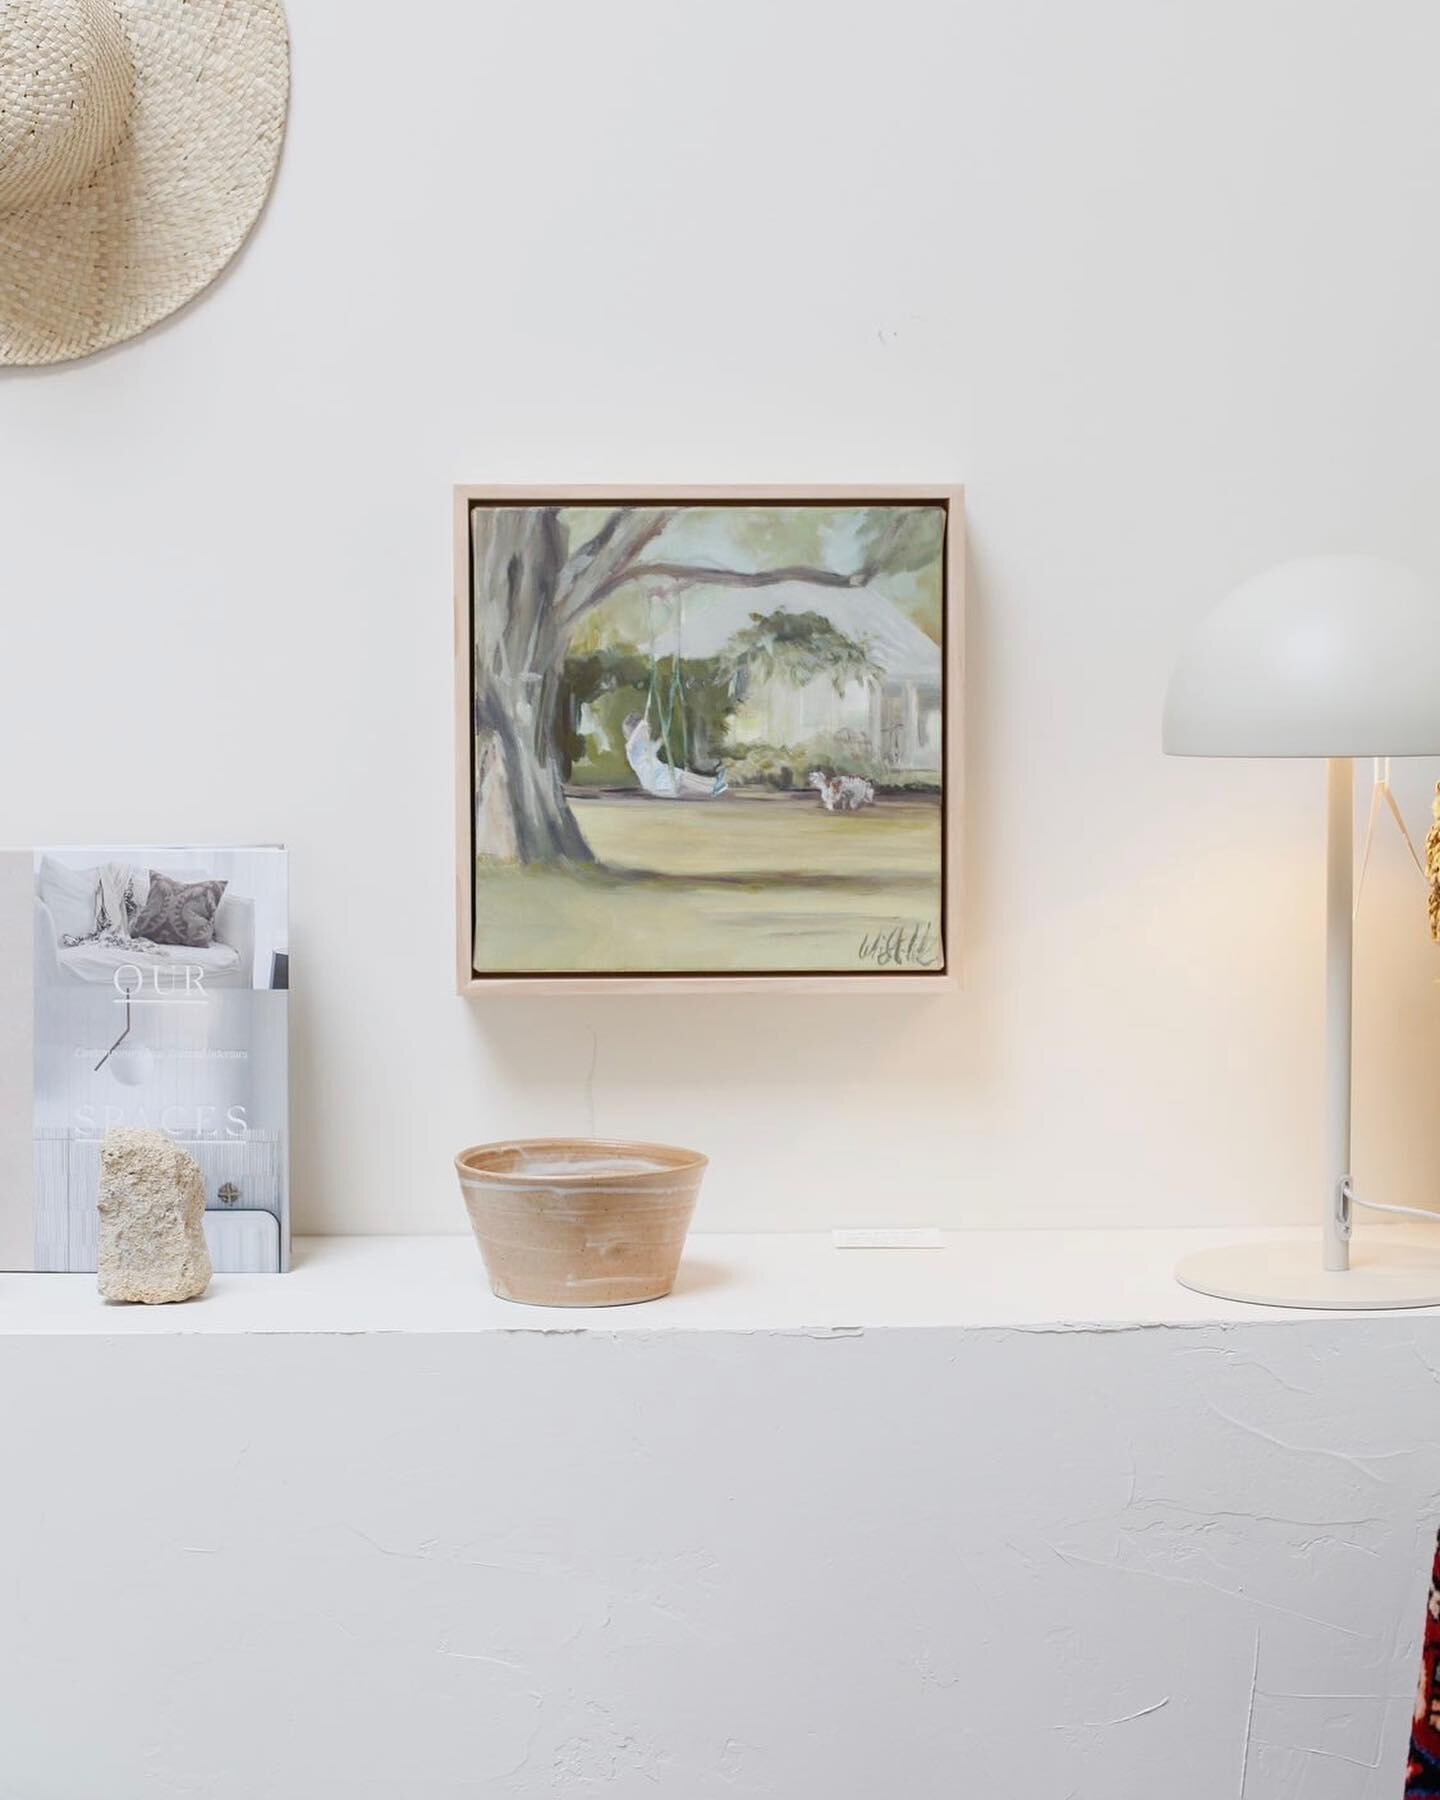 Four paintings have arrived @blackbirdgoods in perfect time for Christmas gifting! Each painting selected personally from my collection by Gemma + Nathan, to sit beautifully within your home &hellip; amongst their many beautiful wares. Having made th